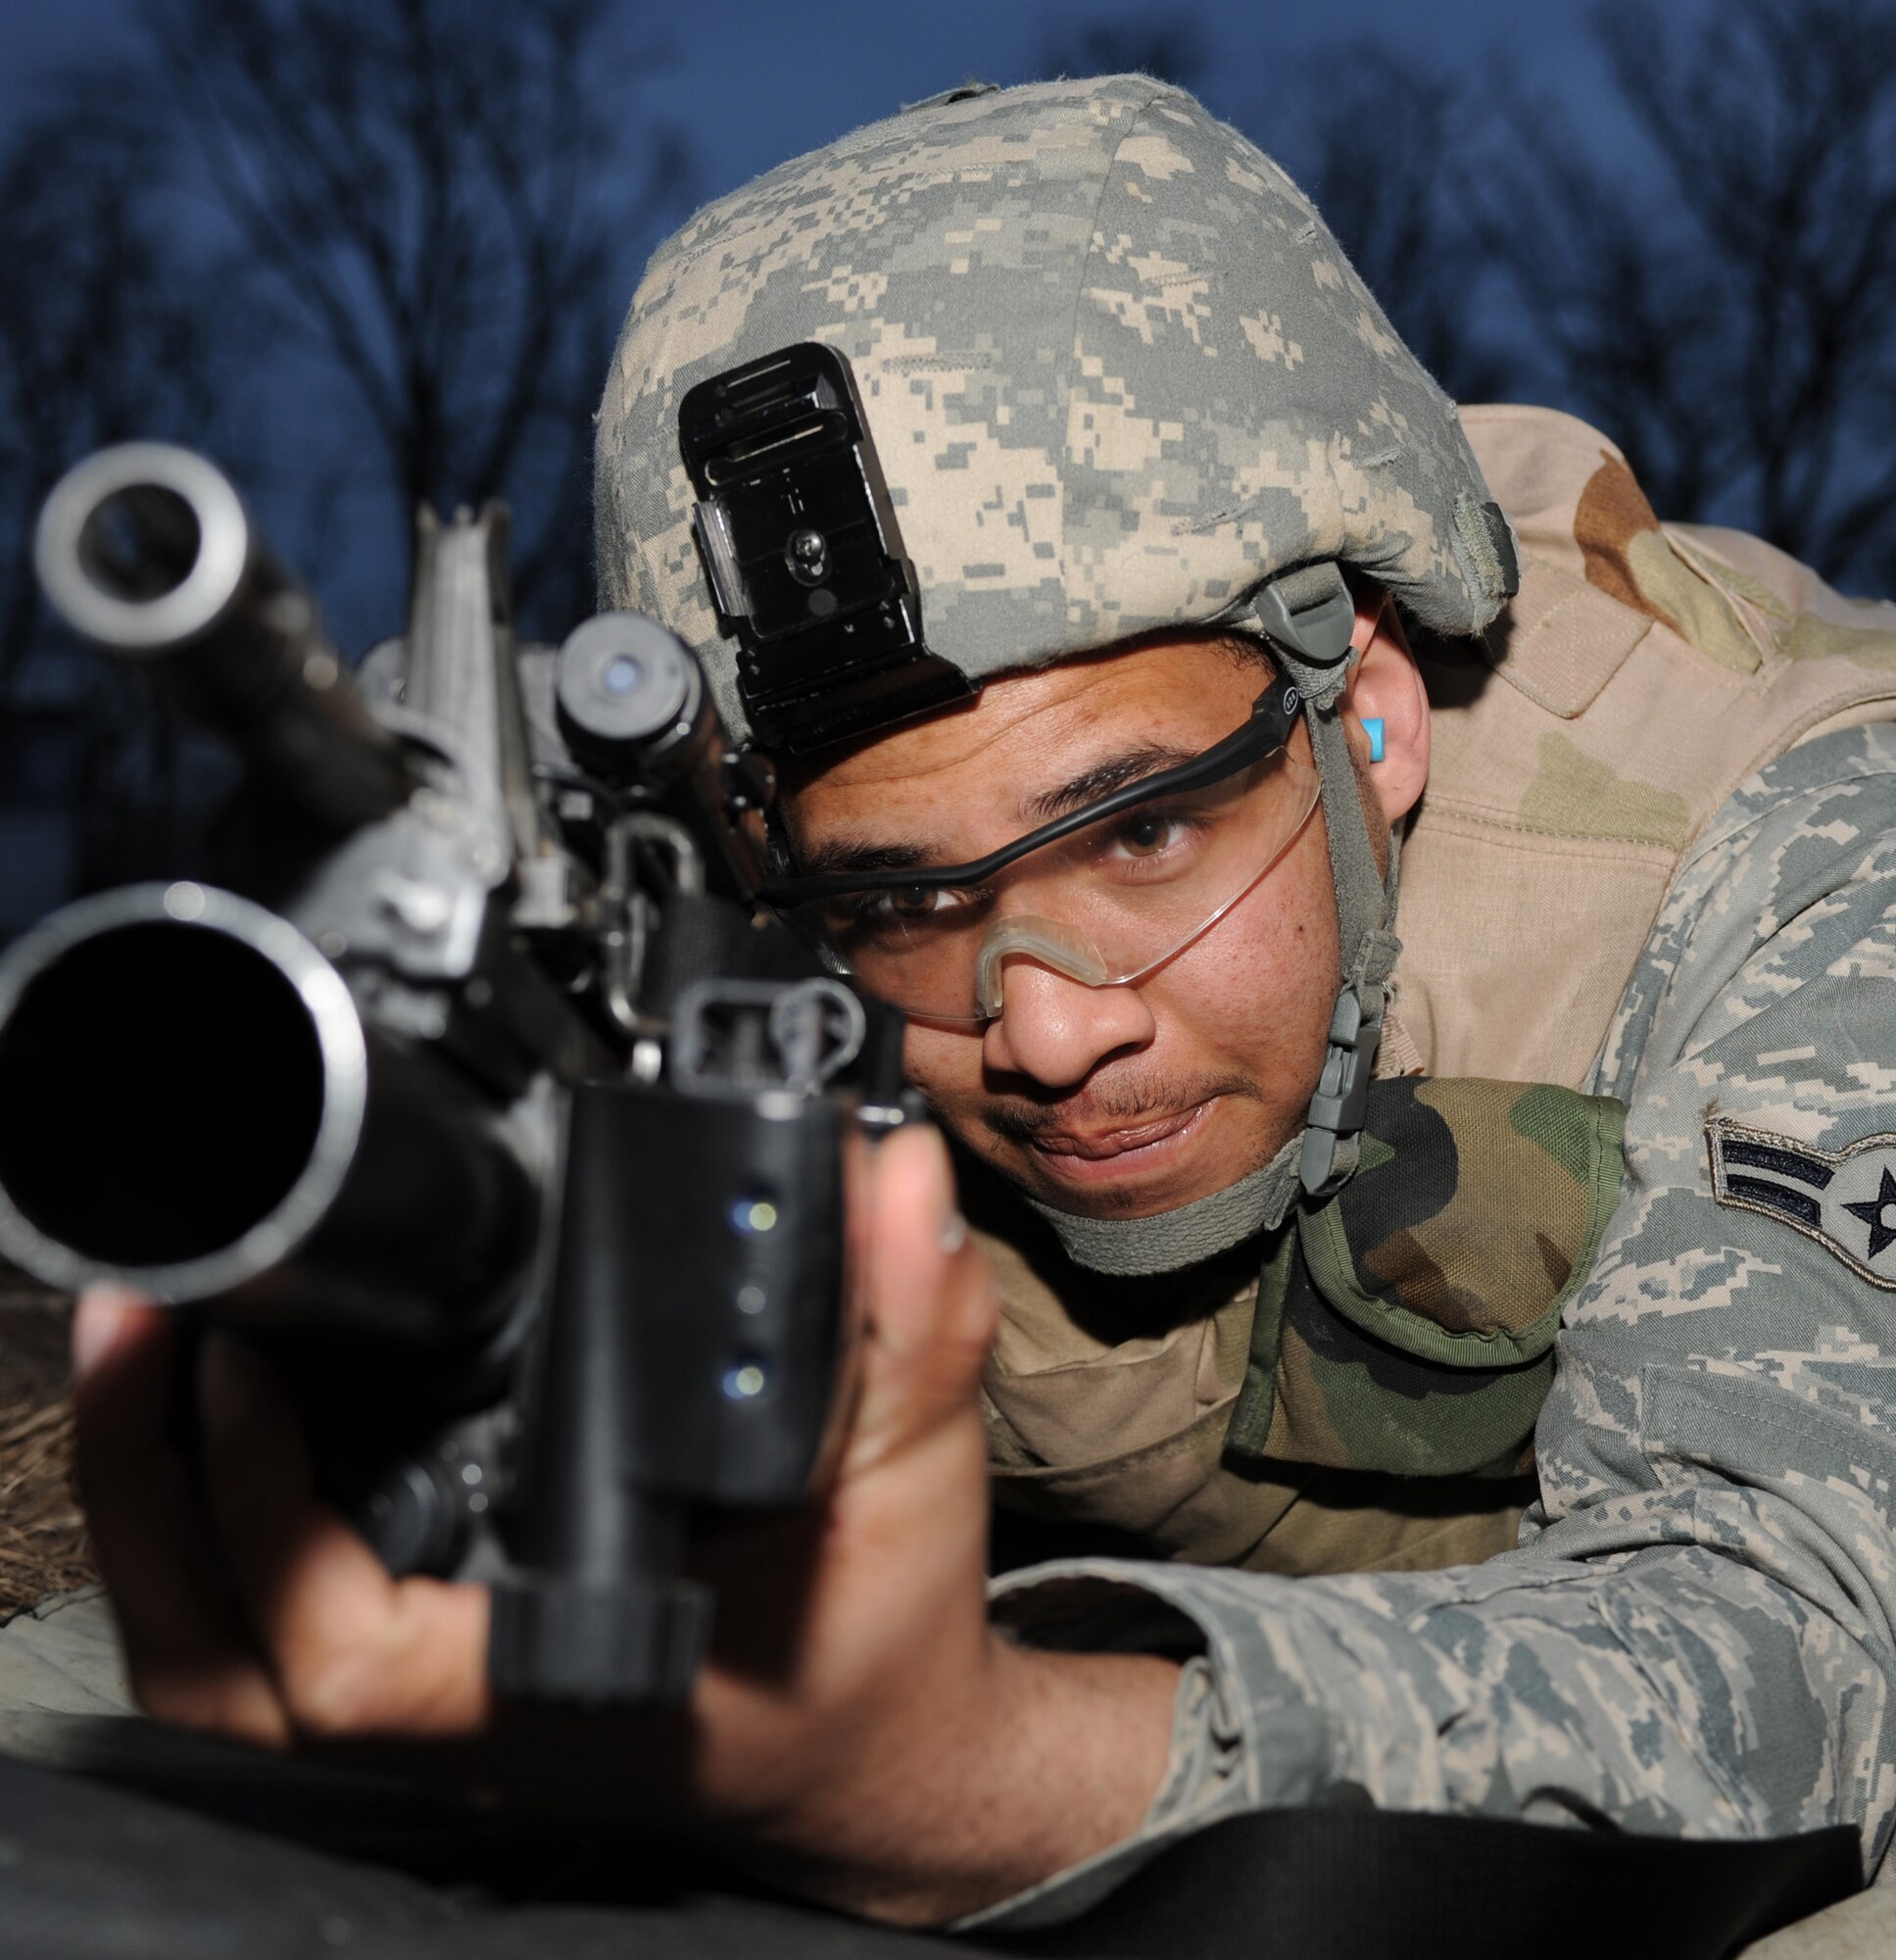 WHITEMAN AIR FORCE BASE, Mo. - Airman 1st Class Troy Young, 509th Security Forces Squadron, prepares to fire the M-203 grenade launcher attachment during training here March 8, 2010. (U.S. Air Force photo/Airman 1st Class Carlin Leslie) 

